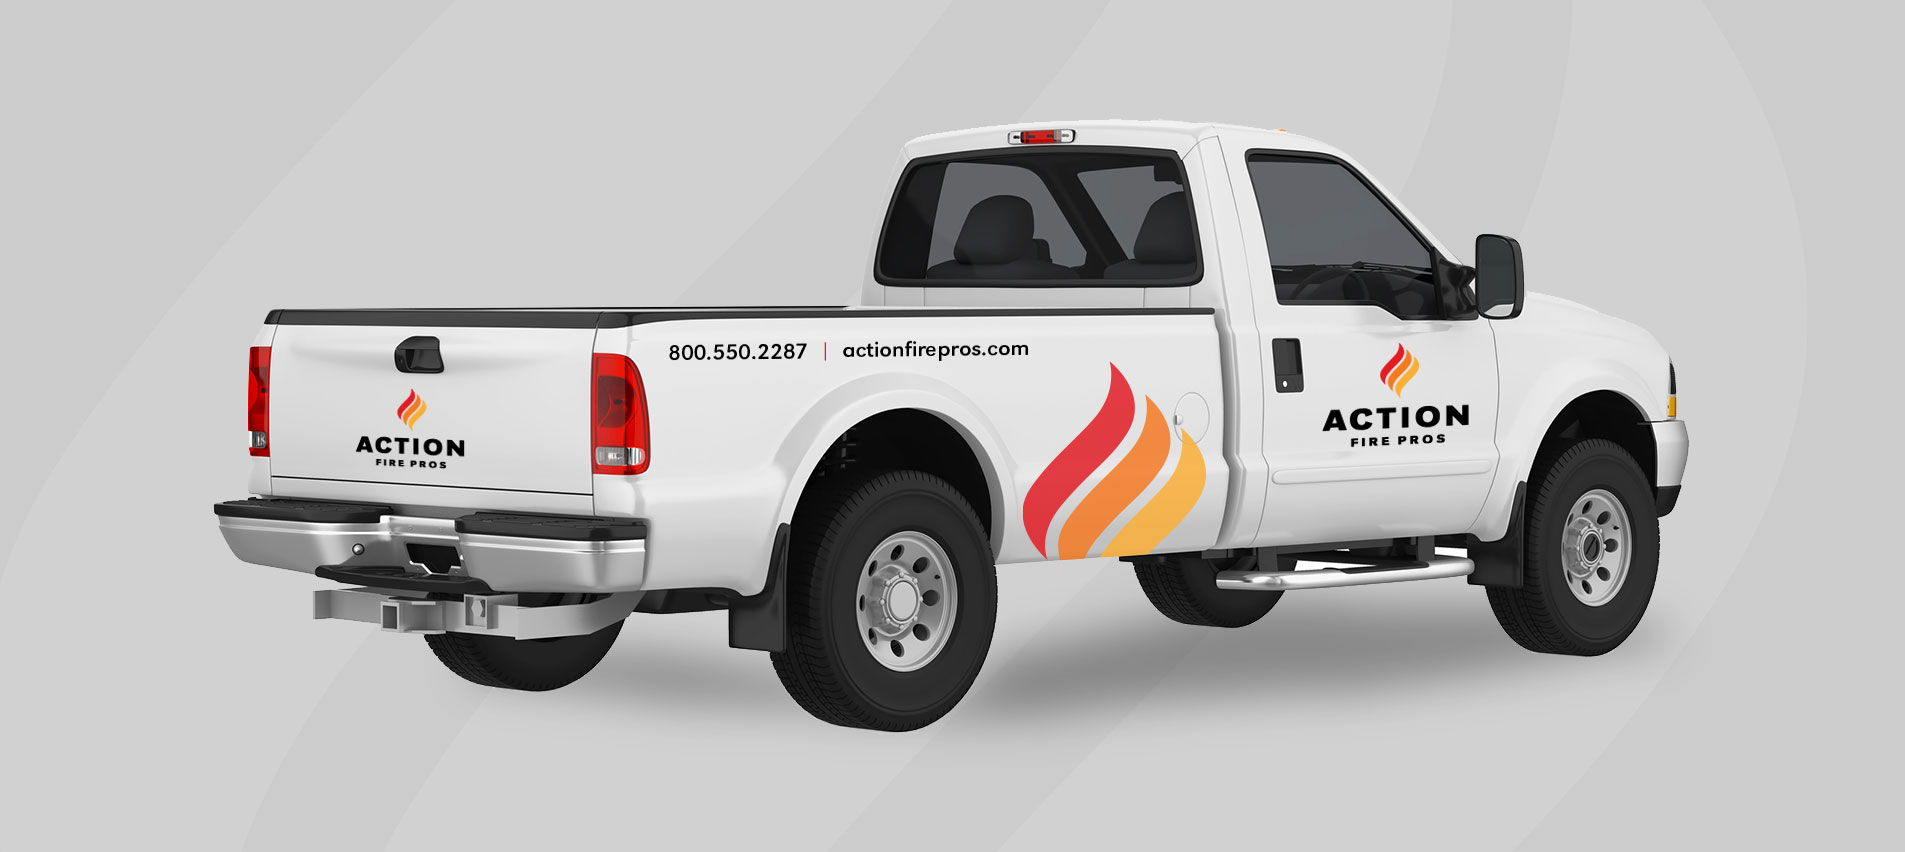 Action Fire Pros truck